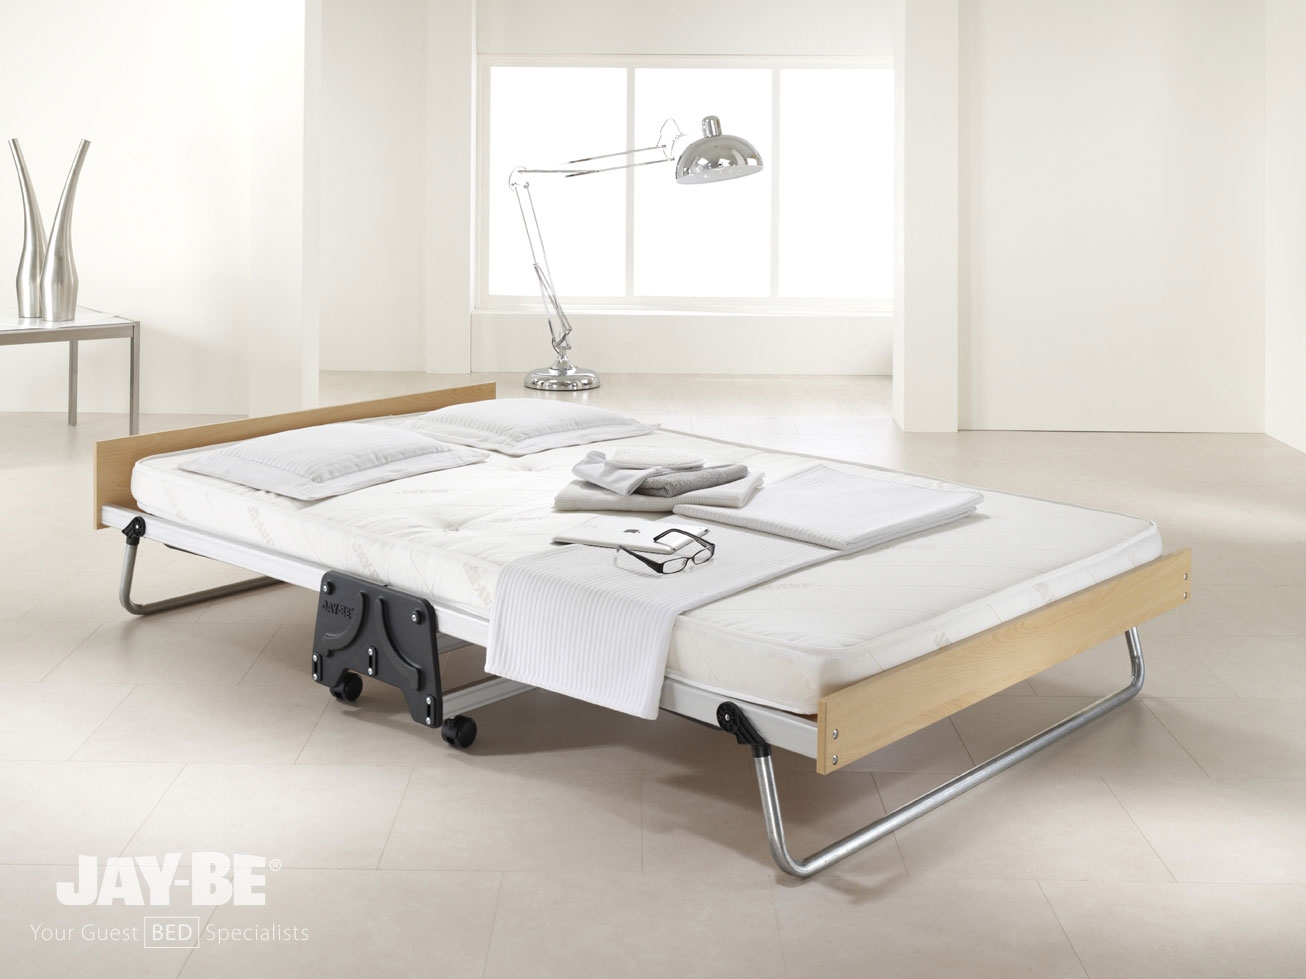 Jay-Be J-Bed Performance Double Folding Bed with